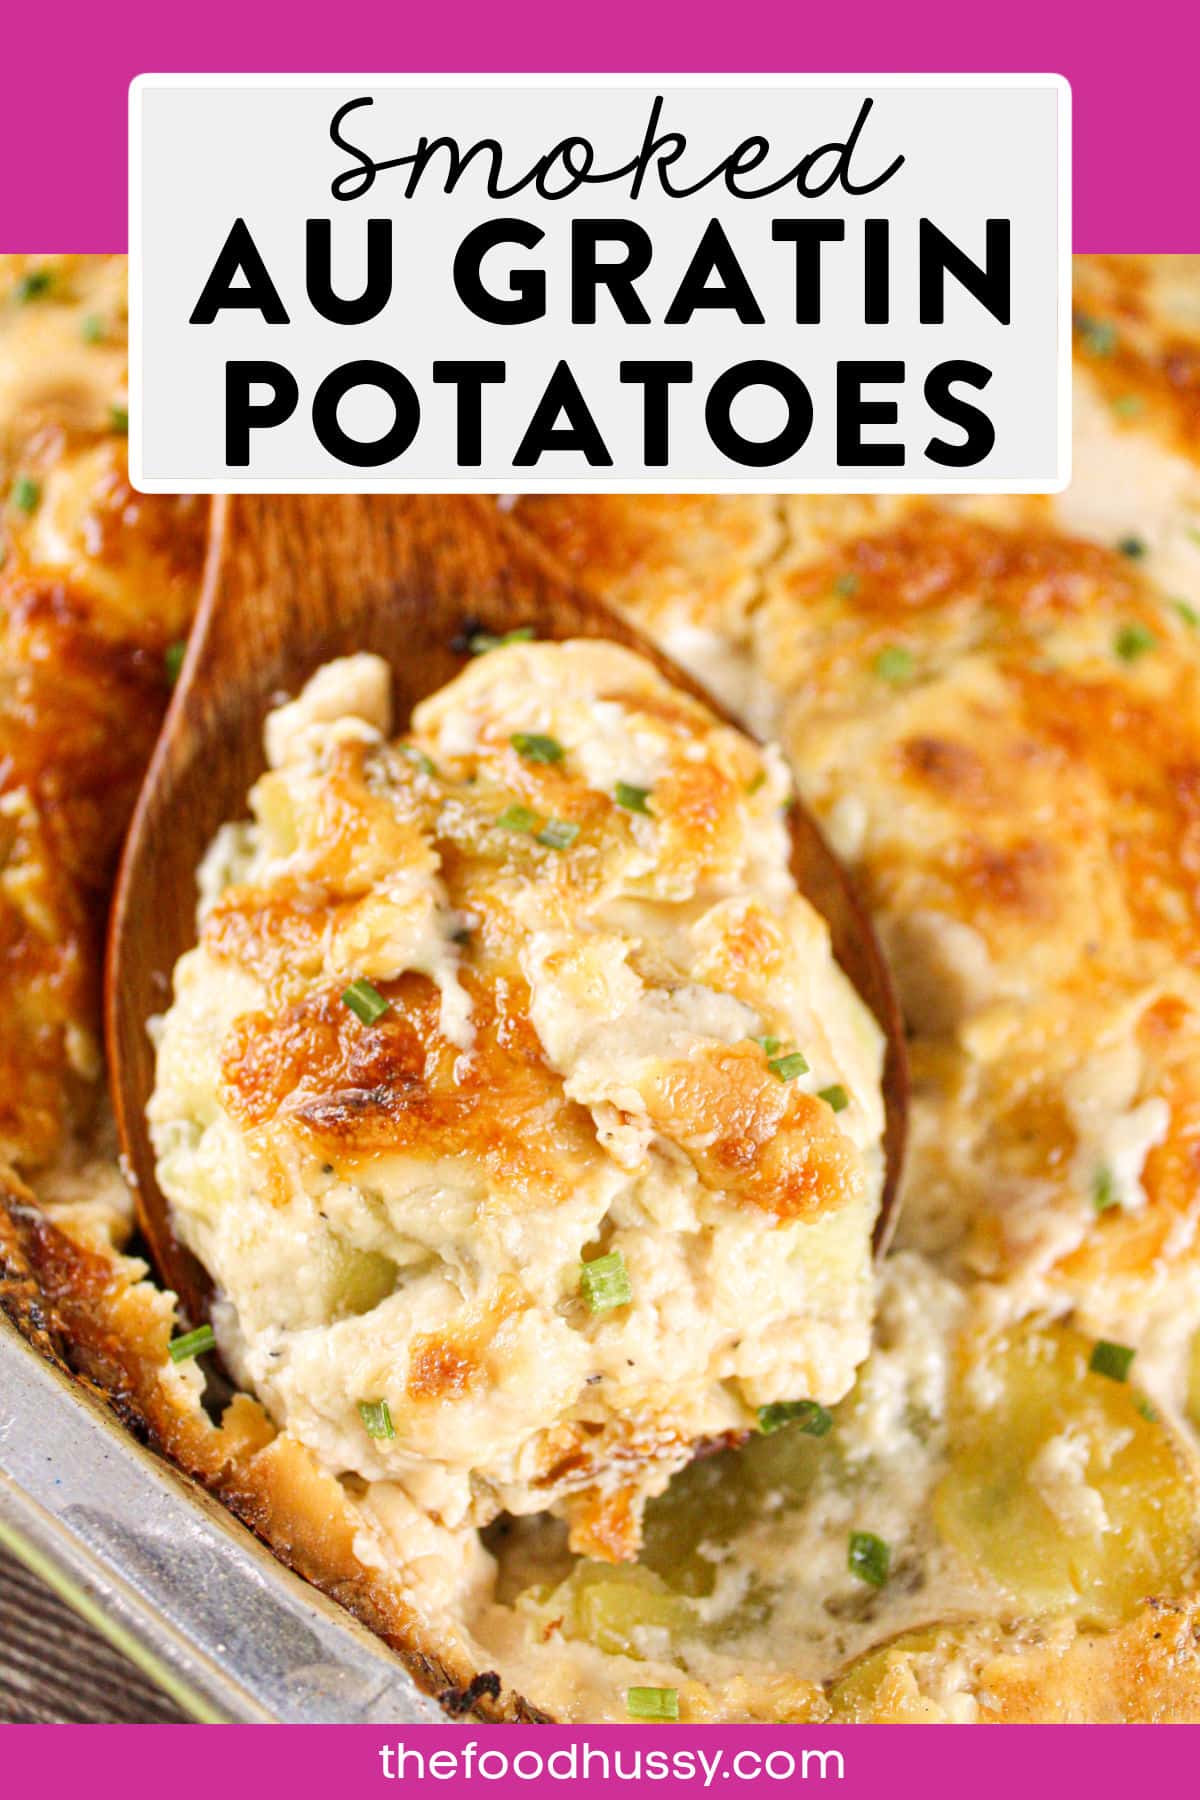 Smoked Au Gratin Potatoes will be your families new favorite side dish! Rich, creamy cheesy sauce slathered all over soft slices of Yukon gold potatoes. So good - you'll curse your mother for feeding you that boxed stuff as a kid!  via @foodhussy